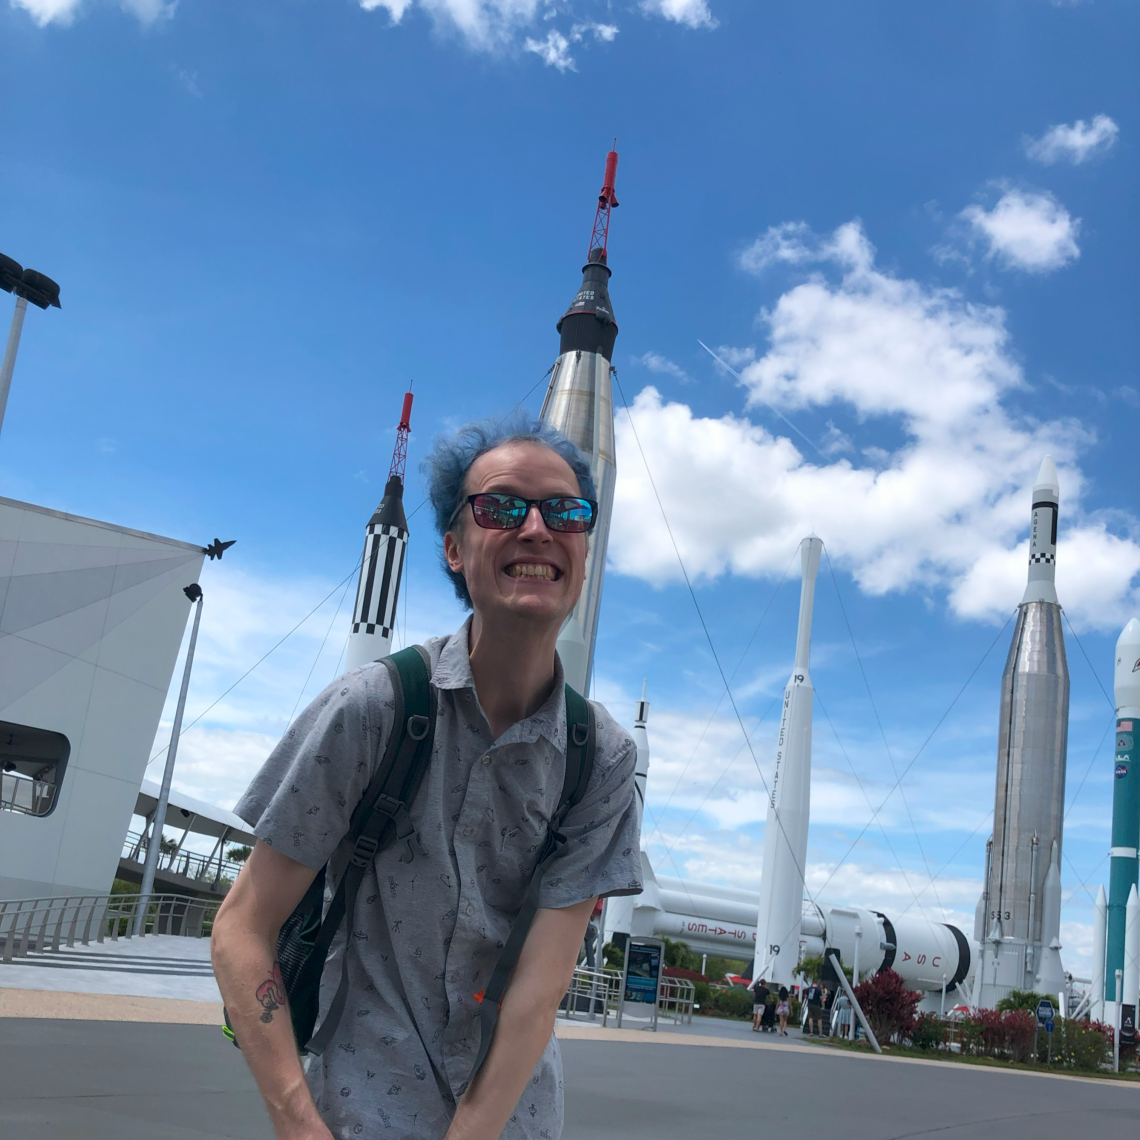 Phoenix standing in front of a series of rockets at Kennedy Space Center